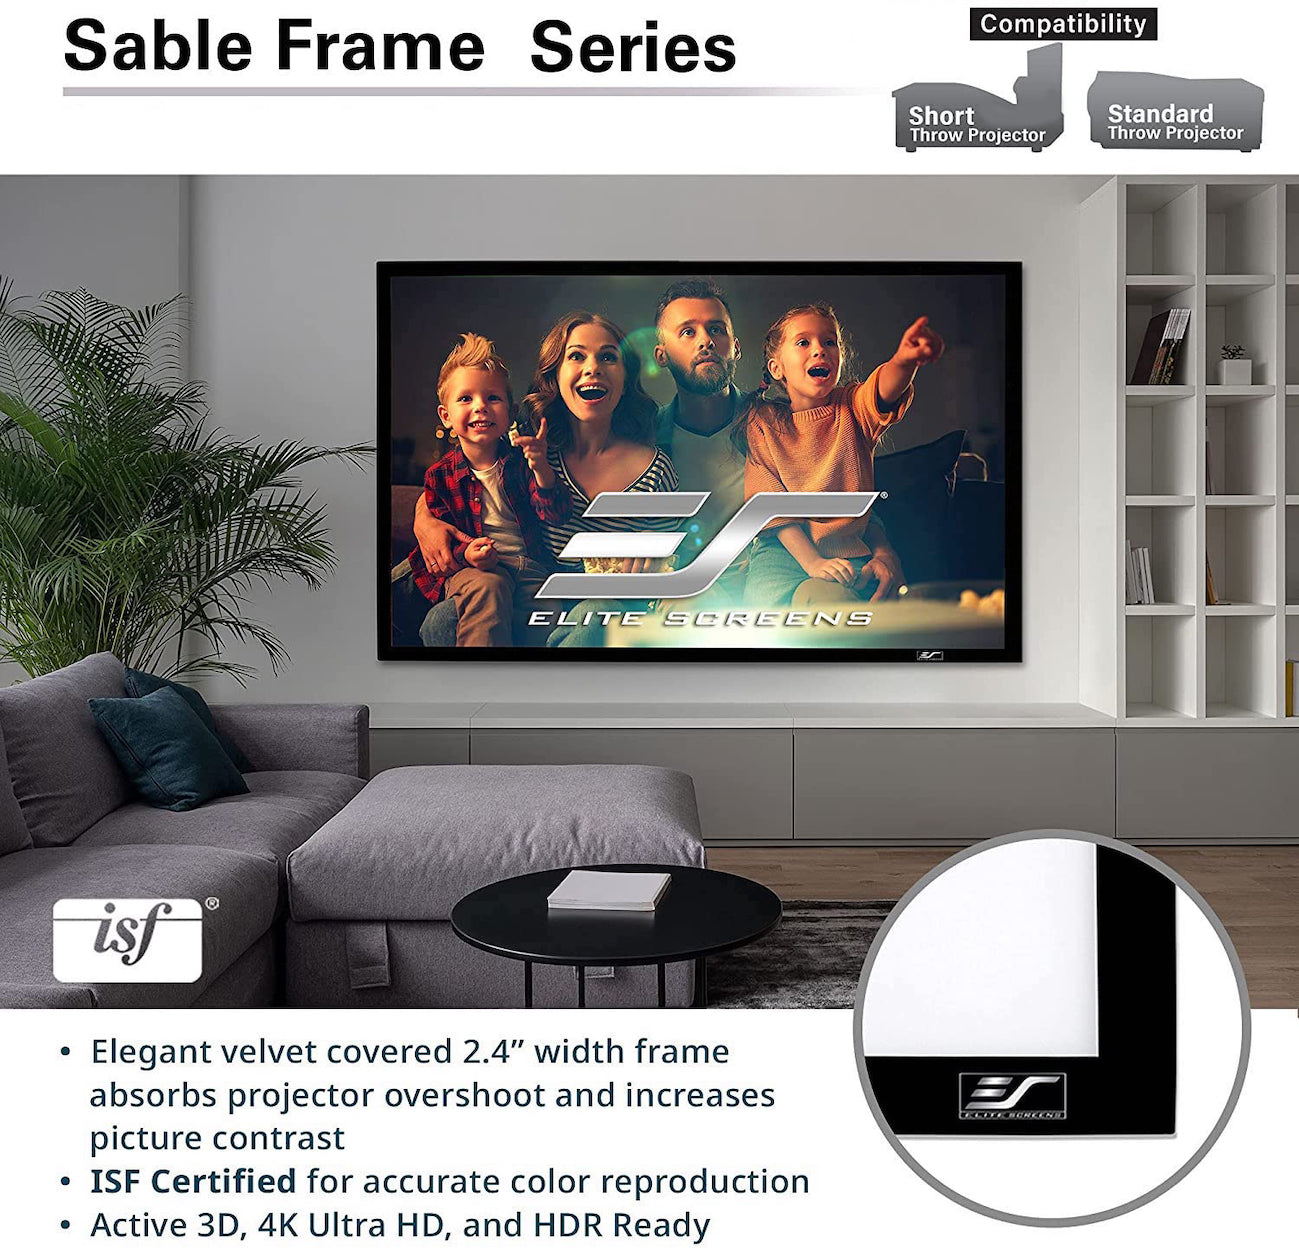 Sable Frame compatibility with normal and Ultra Short throw projectors 